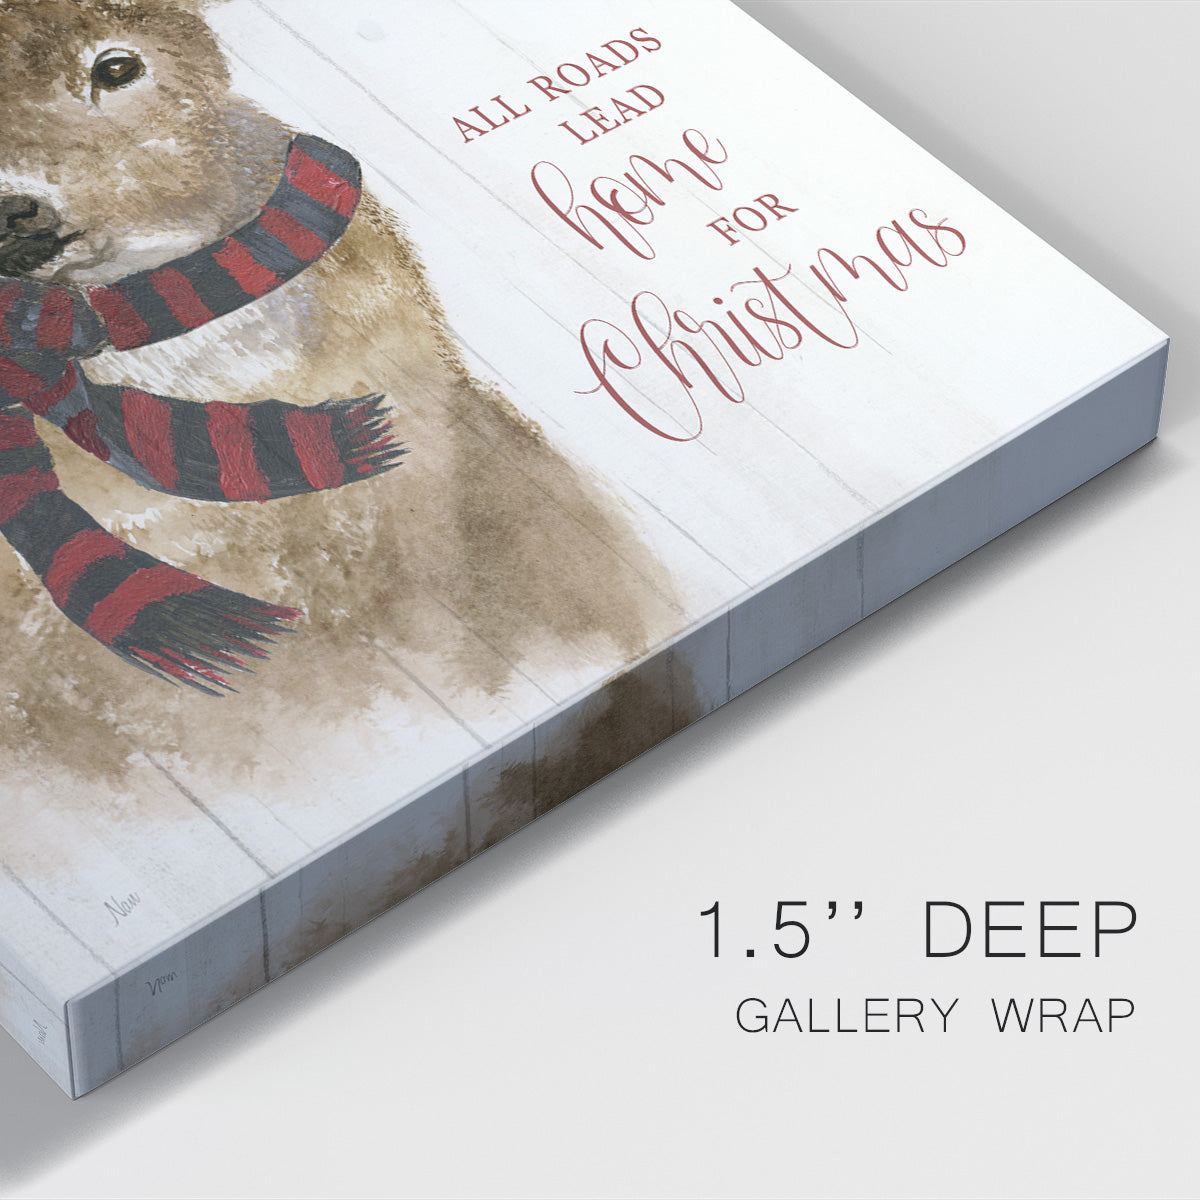 All Roads Lead Home Deer Premium Gallery Wrapped Canvas - Ready to Hang